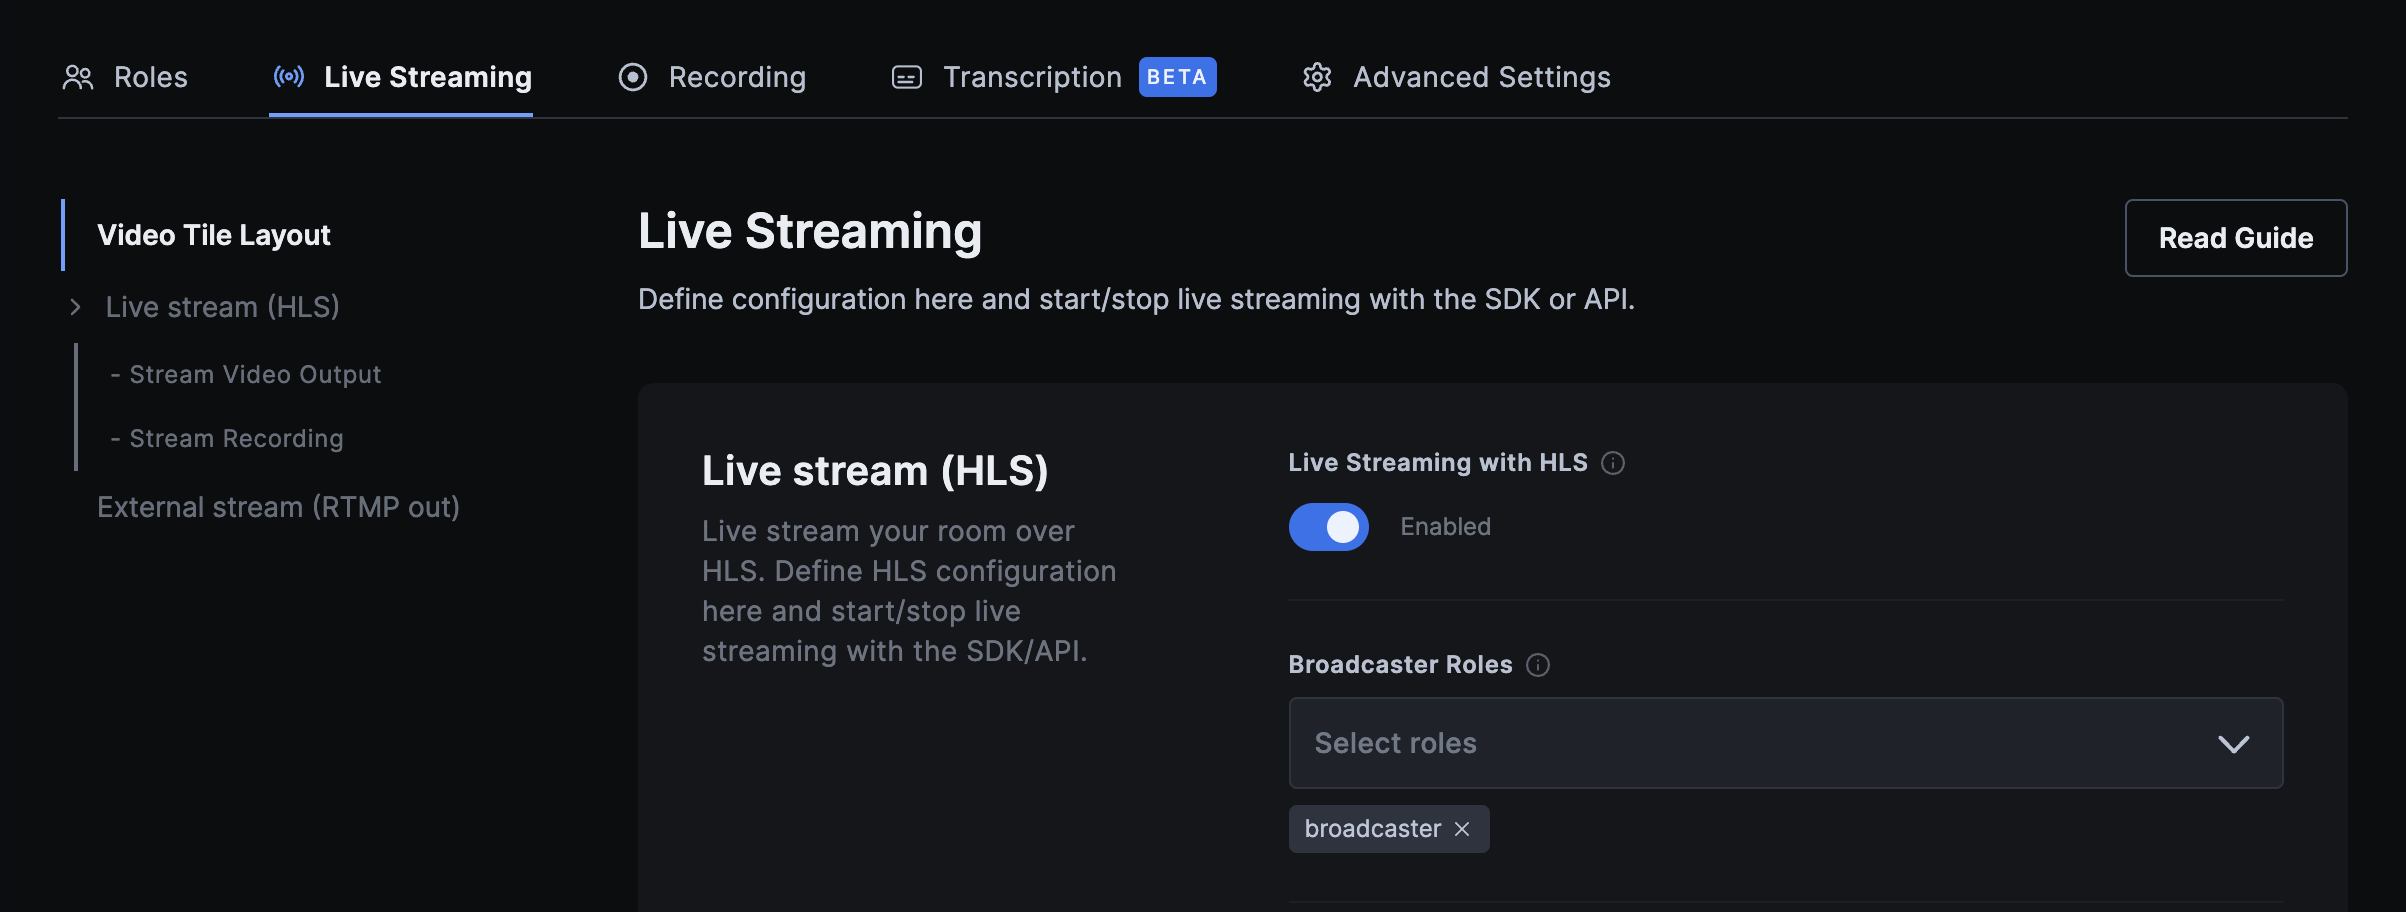 Enable live streaming